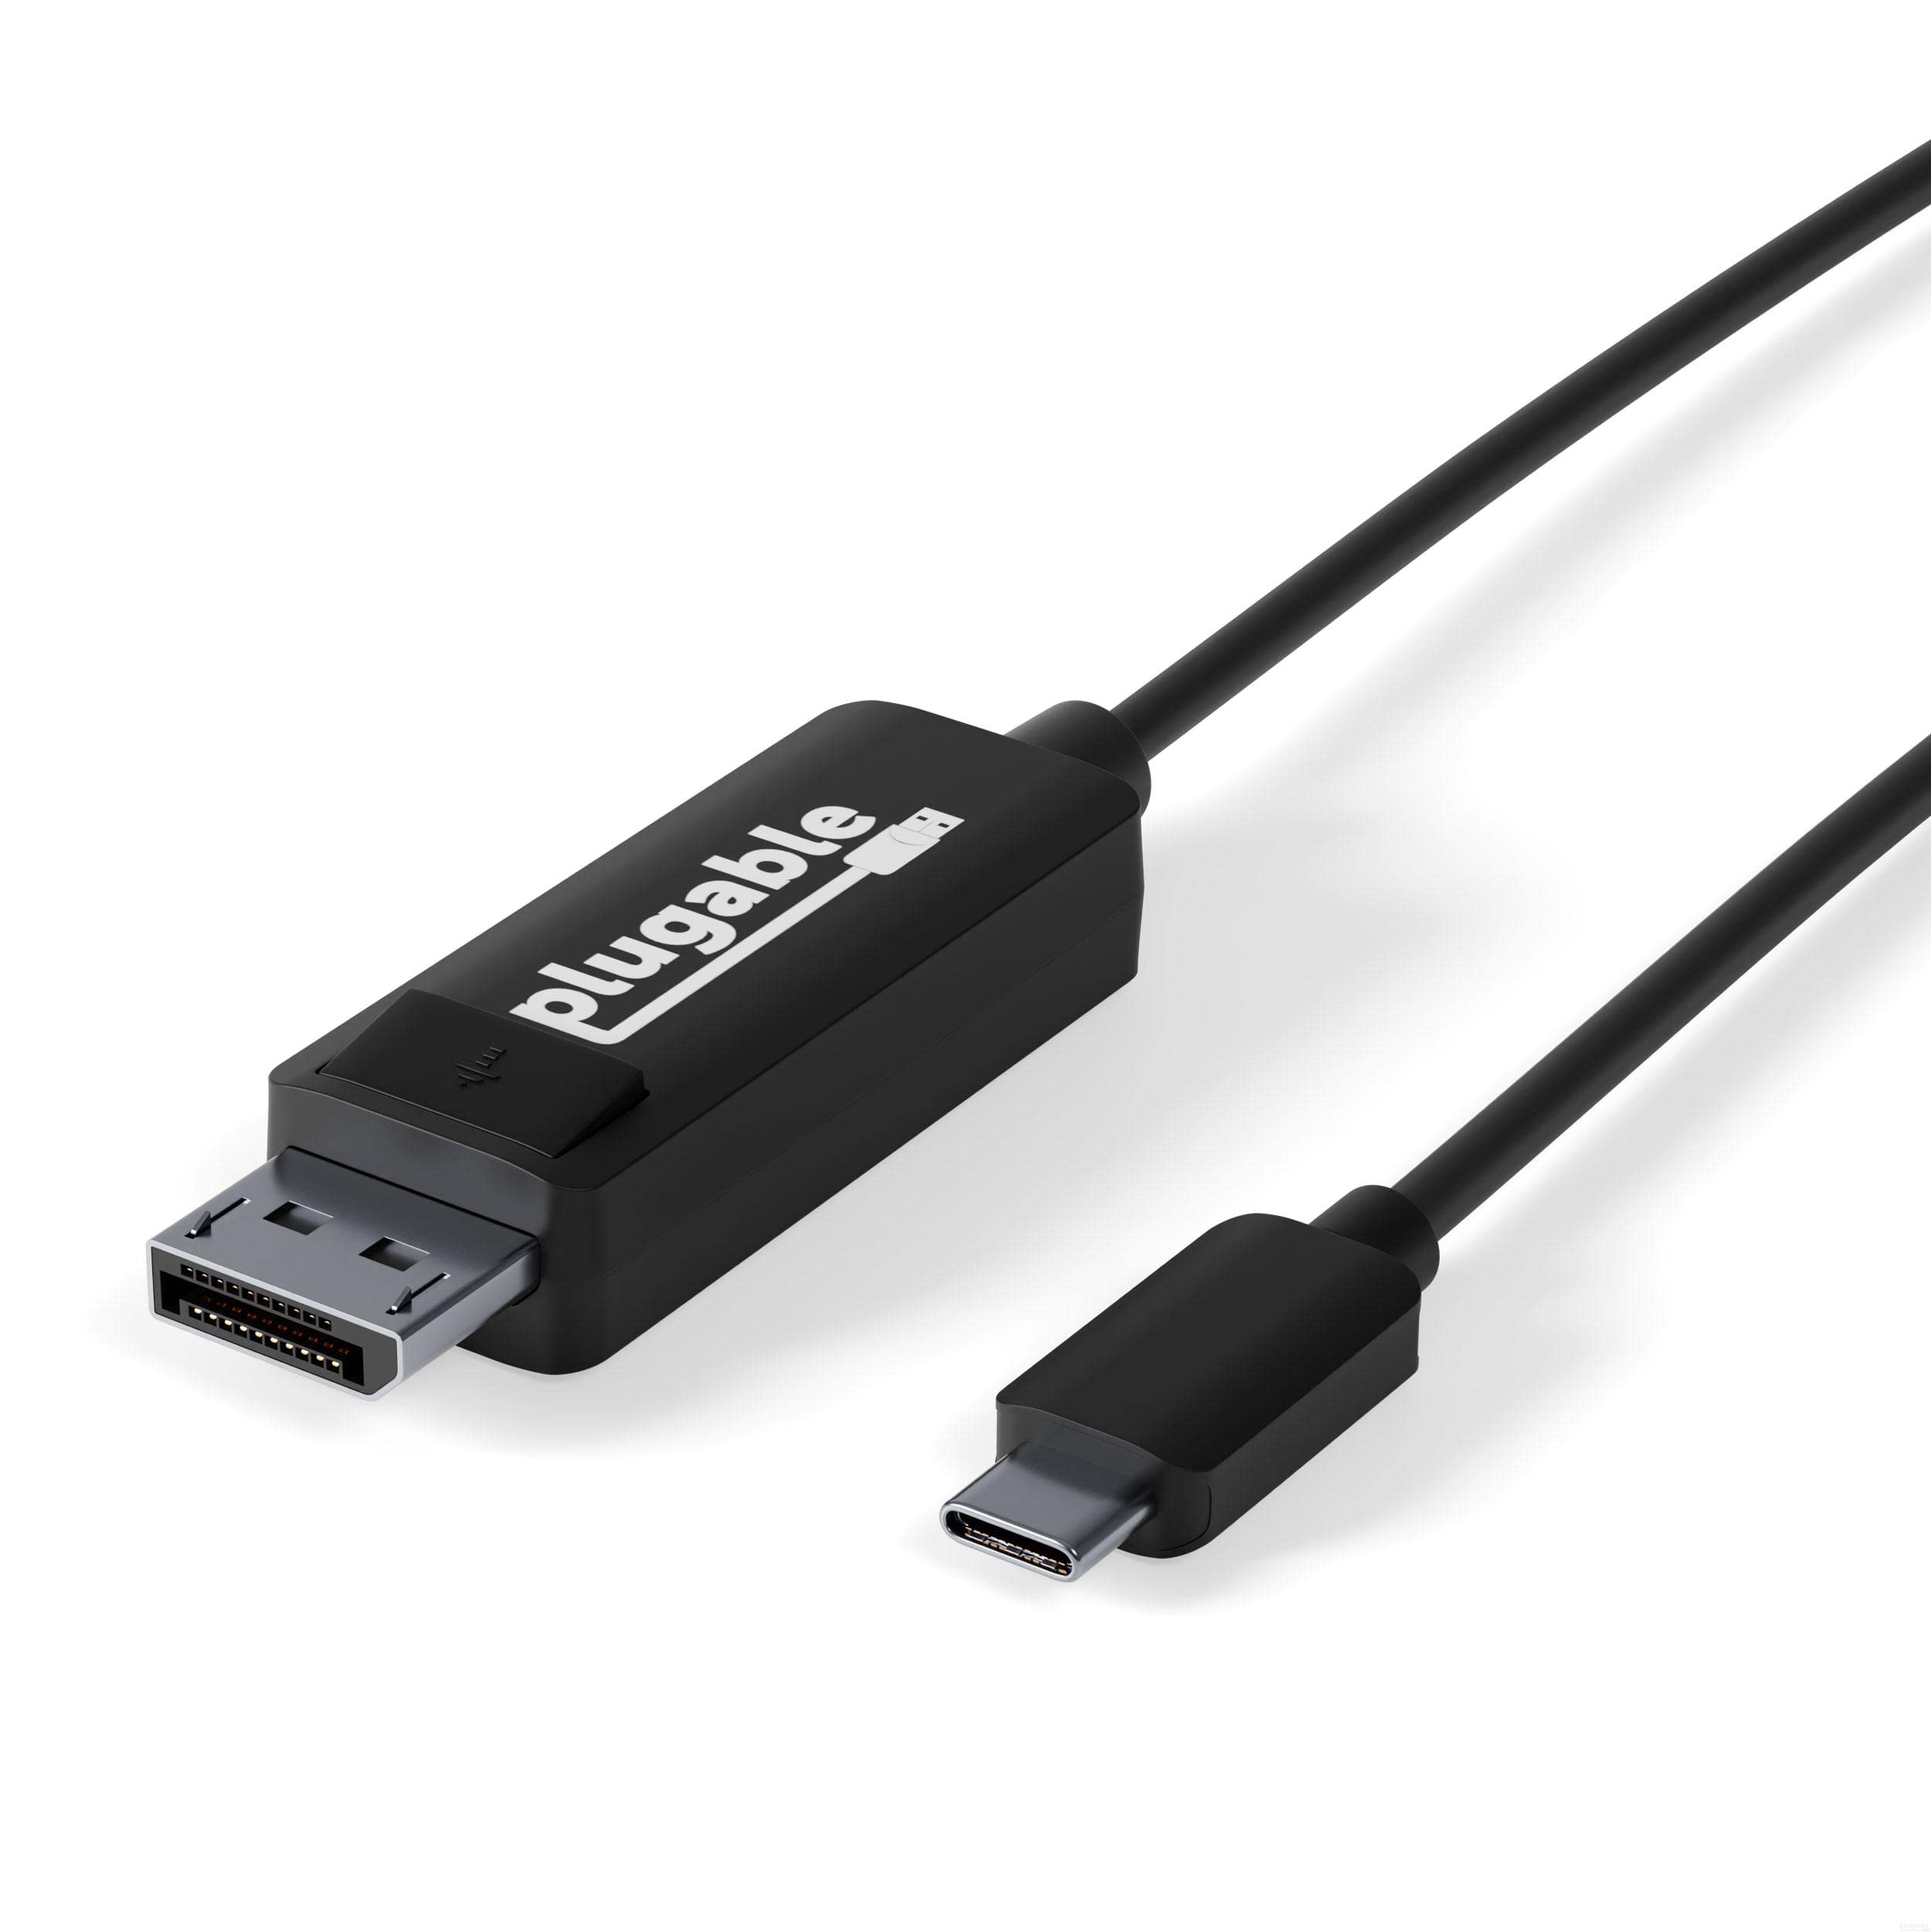 If possible, try using a different USB-C cable or adapter to connect the display
There might be a fault with the current cable or adapter being used